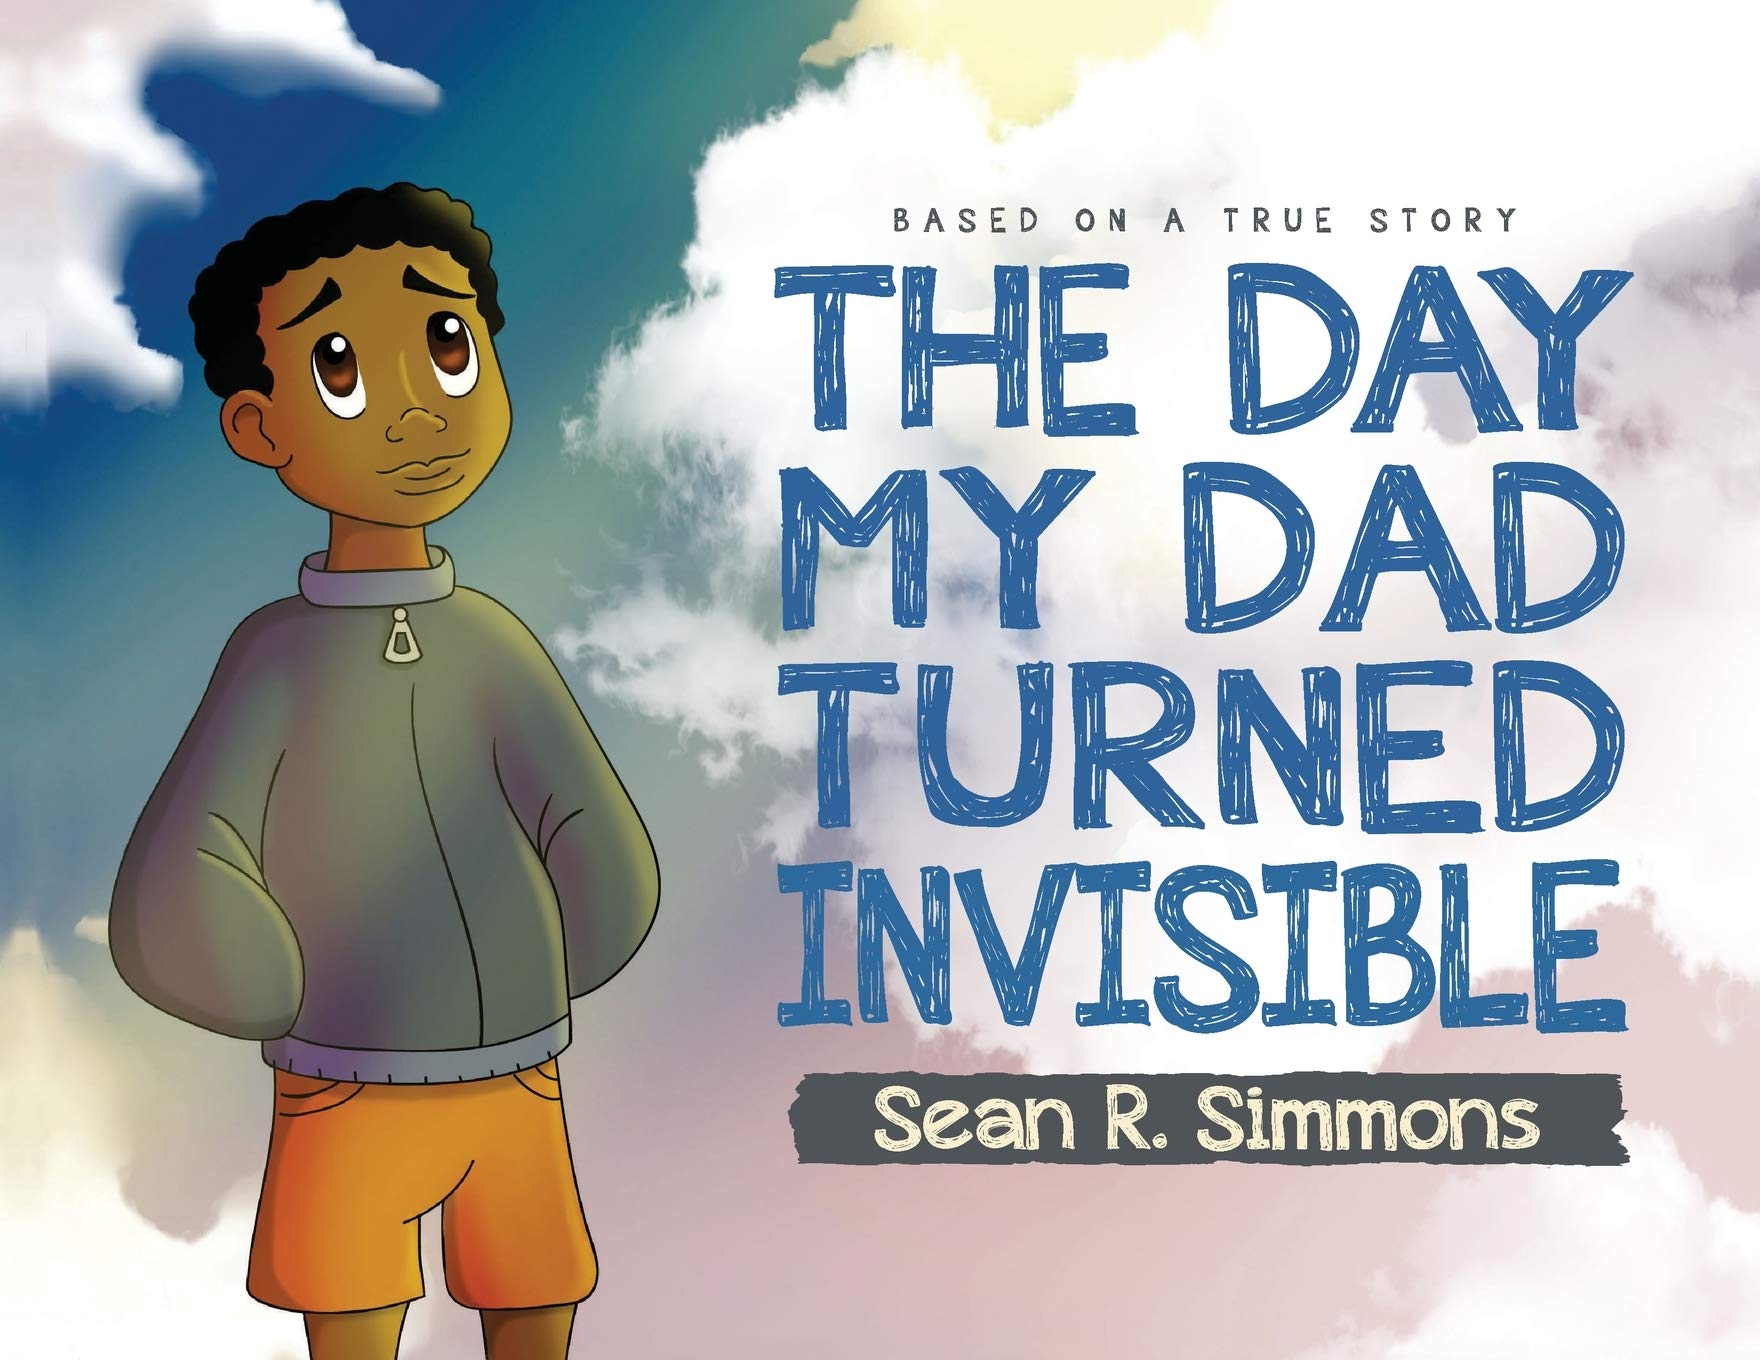 The Day My Dad Turned Invisible by Sean R. Simmons book cover